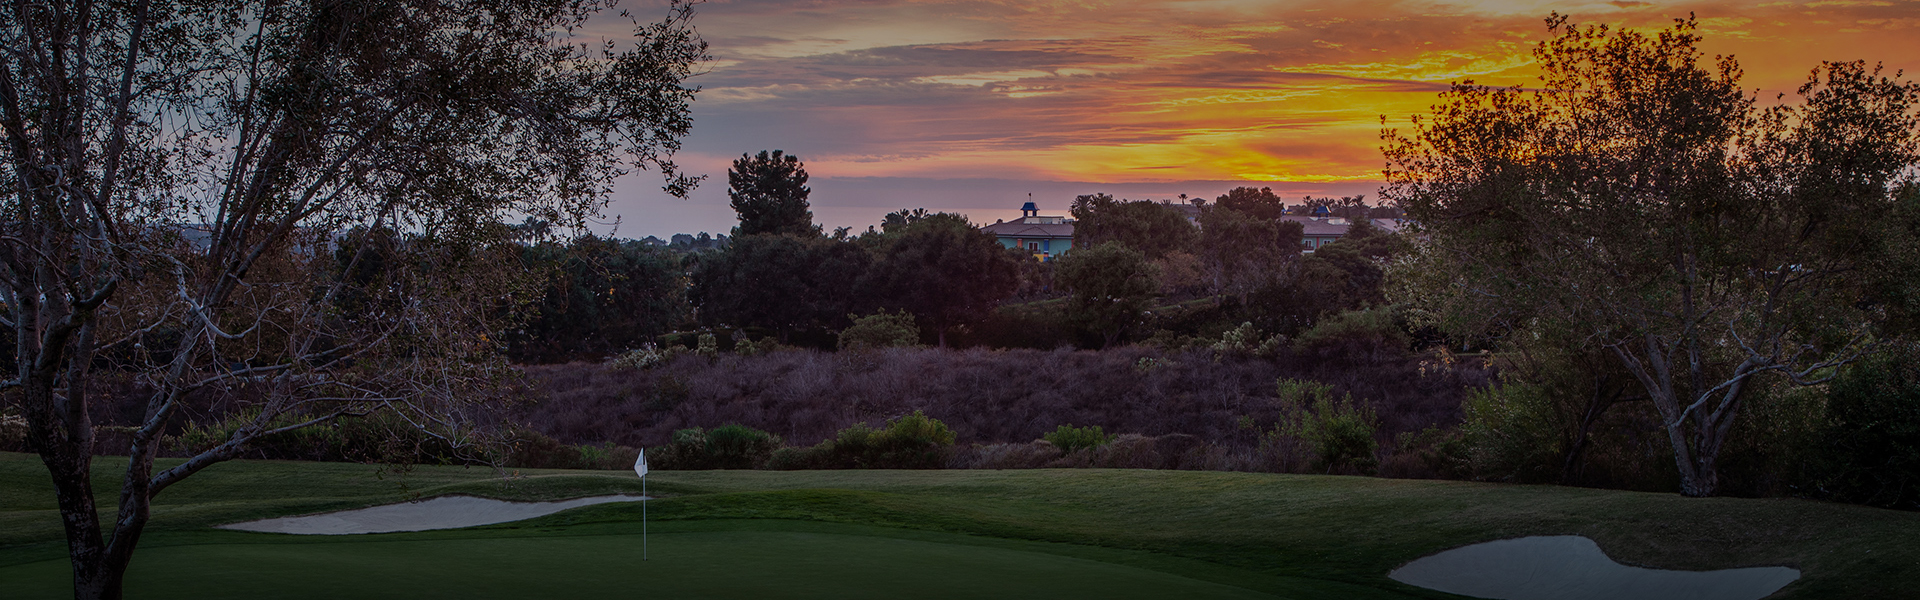 panoramic view of the course at dusk